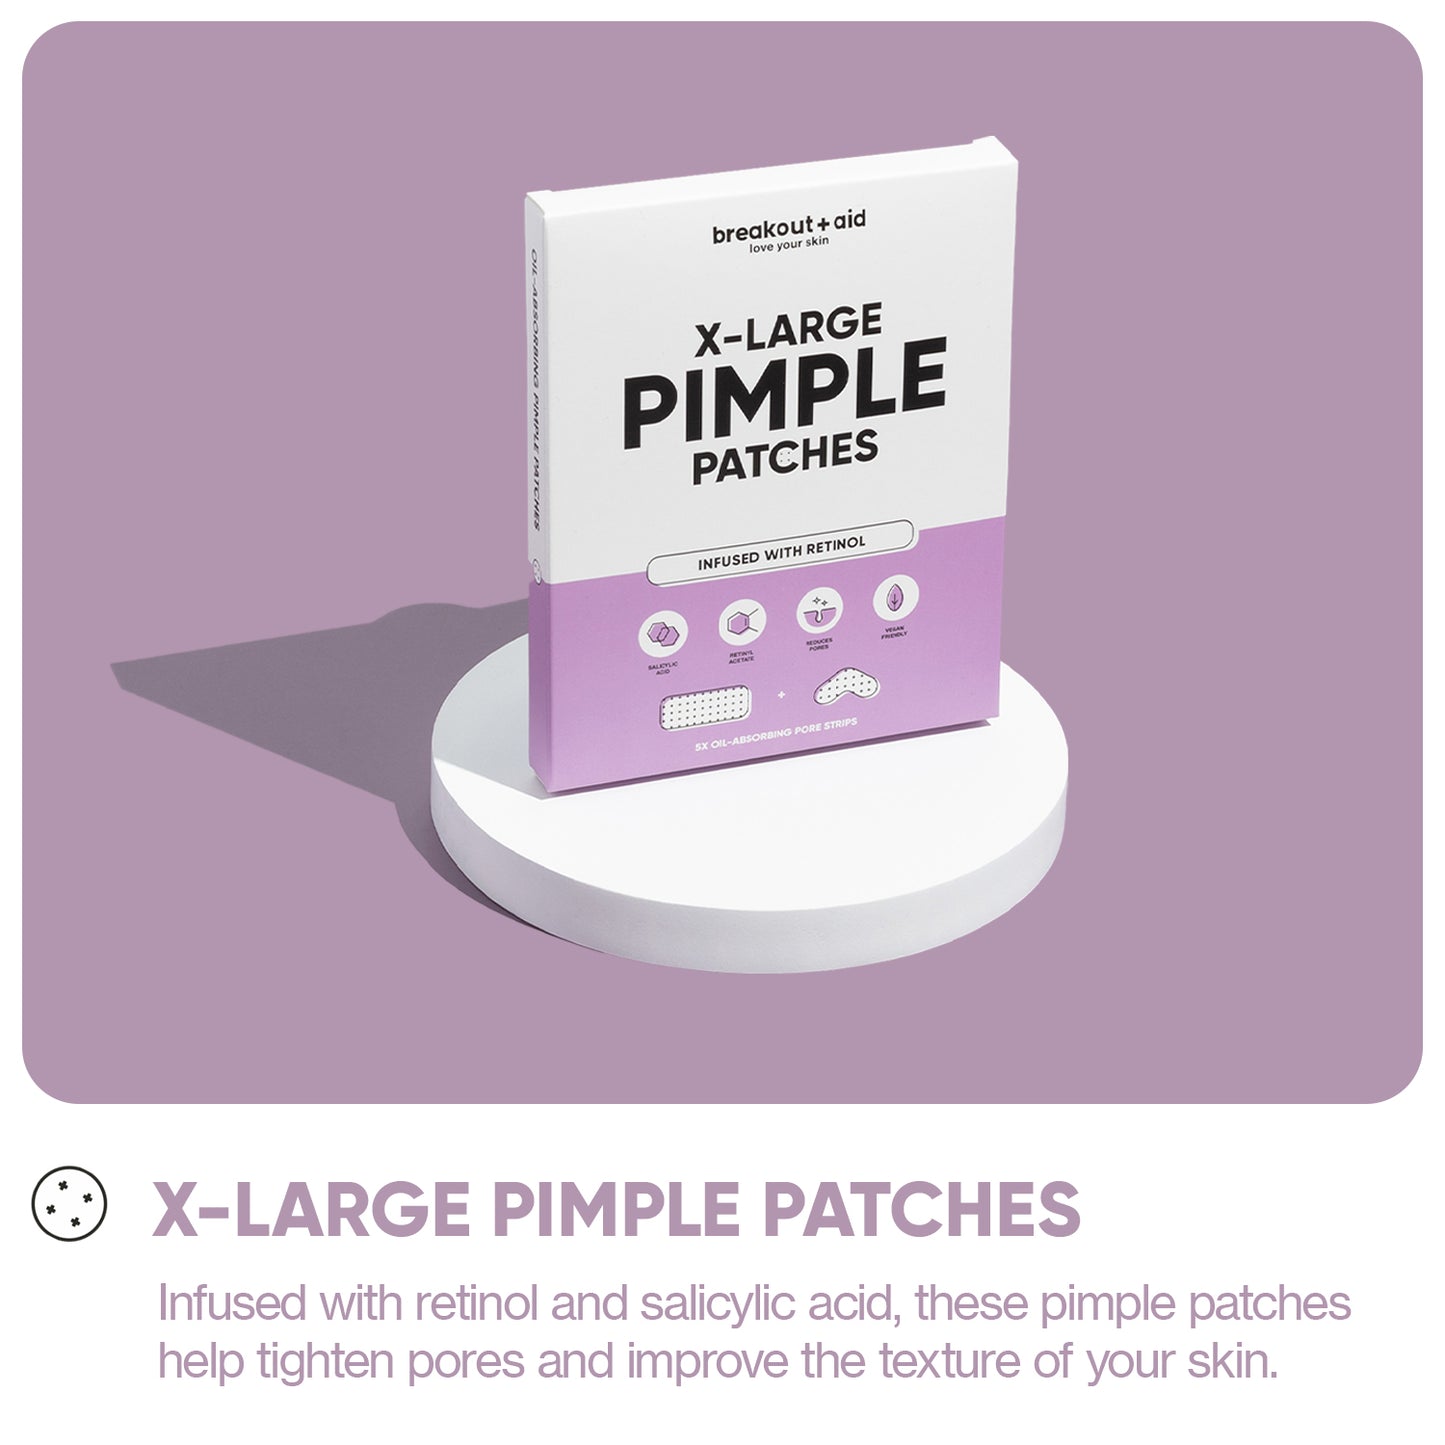 X-Large Pimple Patches Infused with Retinol & Salicylic acid.